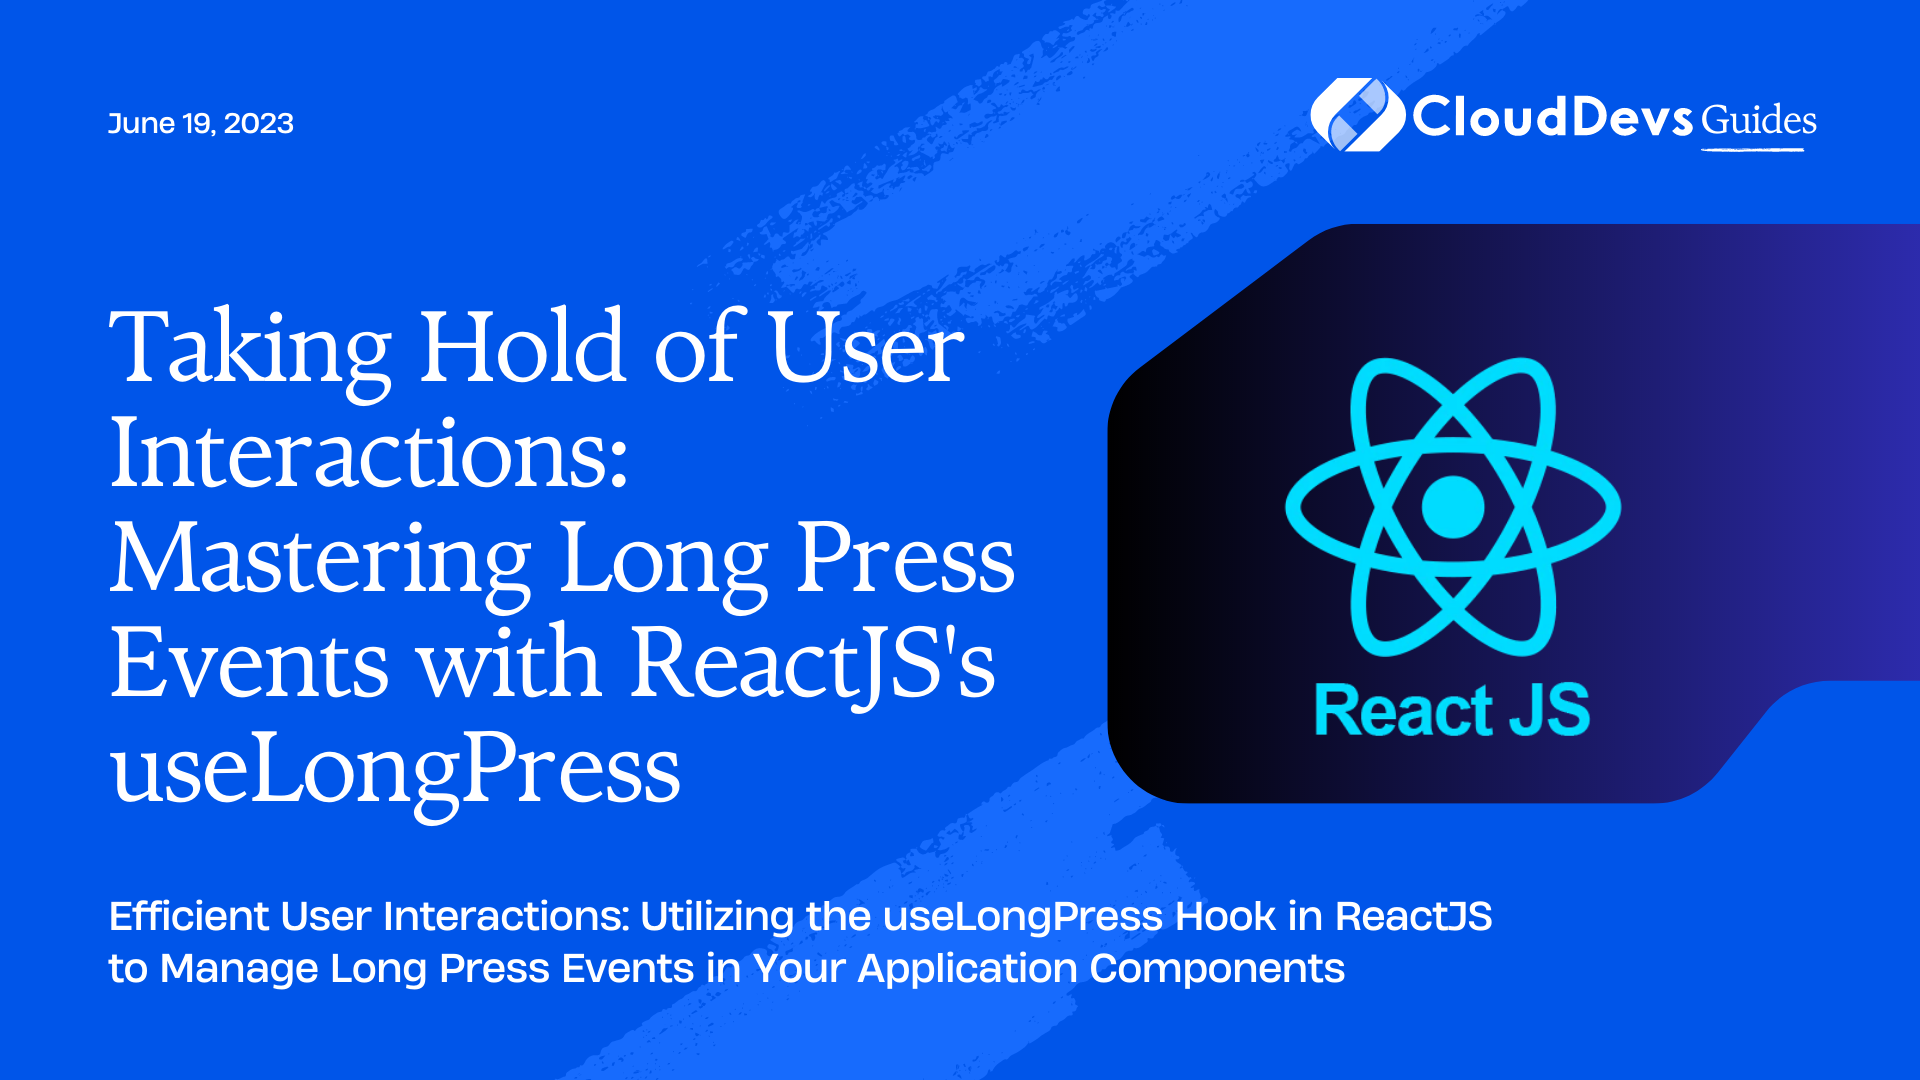 Taking Hold of User Interactions: Mastering Long Press Events with ReactJS's useLongPress